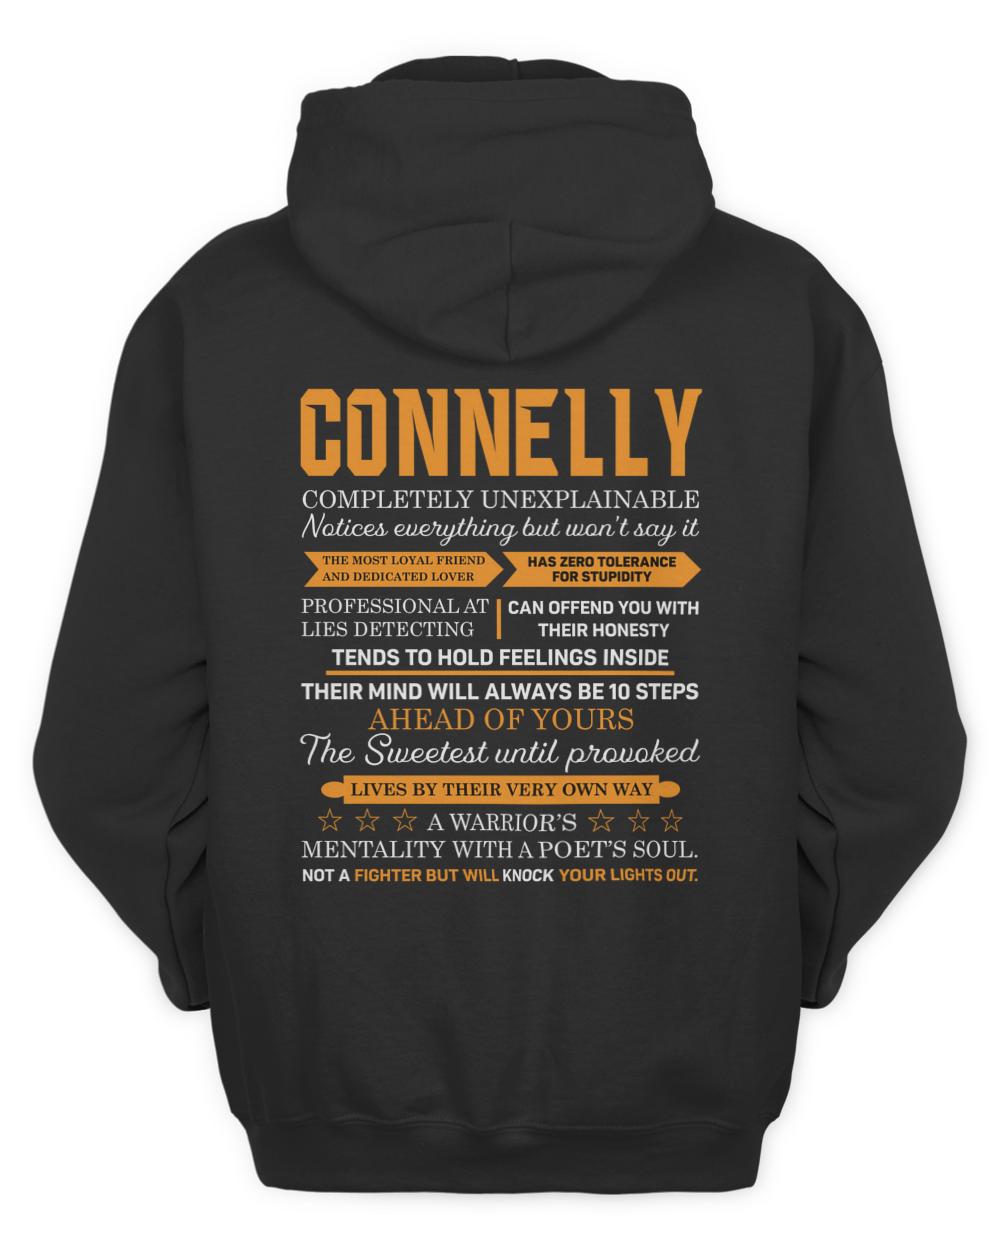 CONNELLY-13K-N1-01